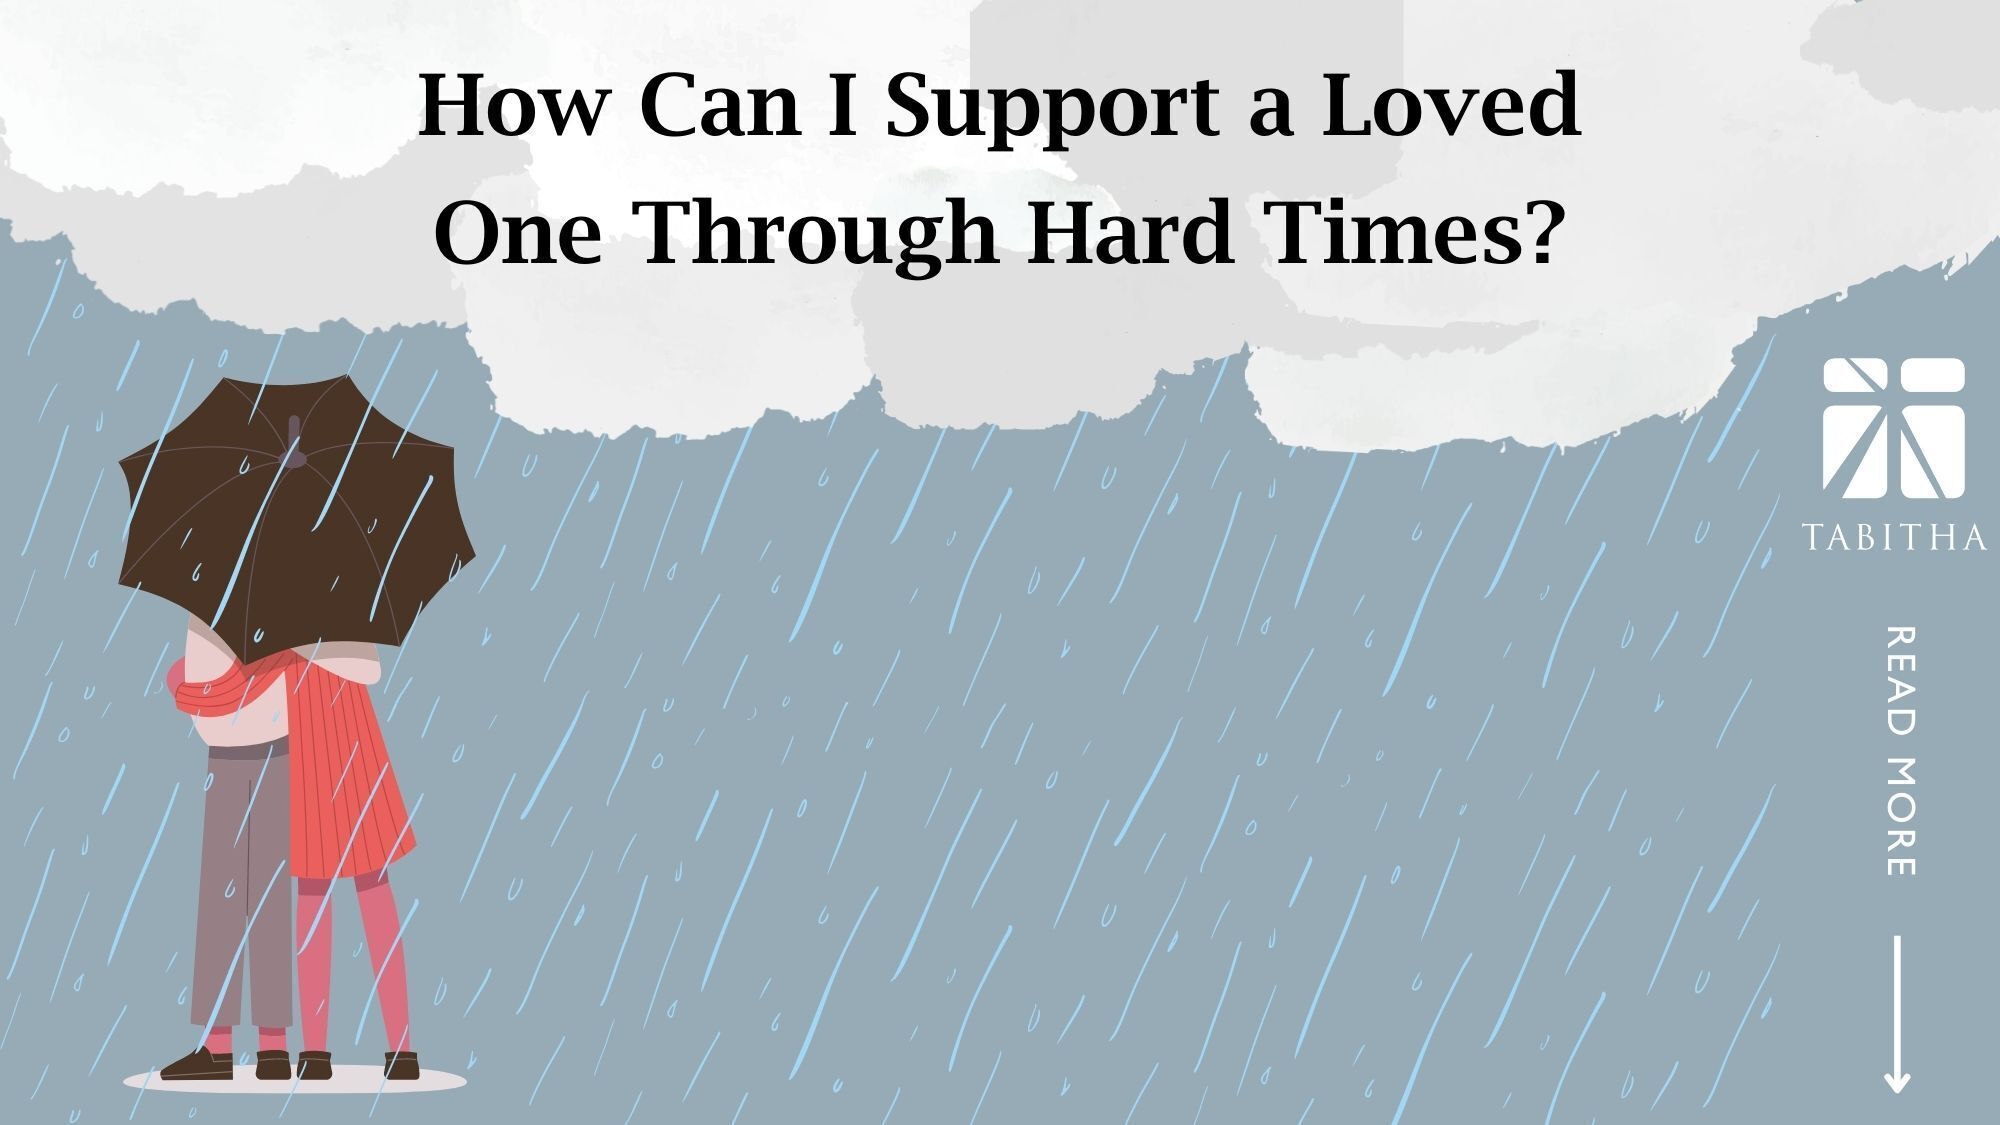 How Can I Support a Loved One Through Hard Times?